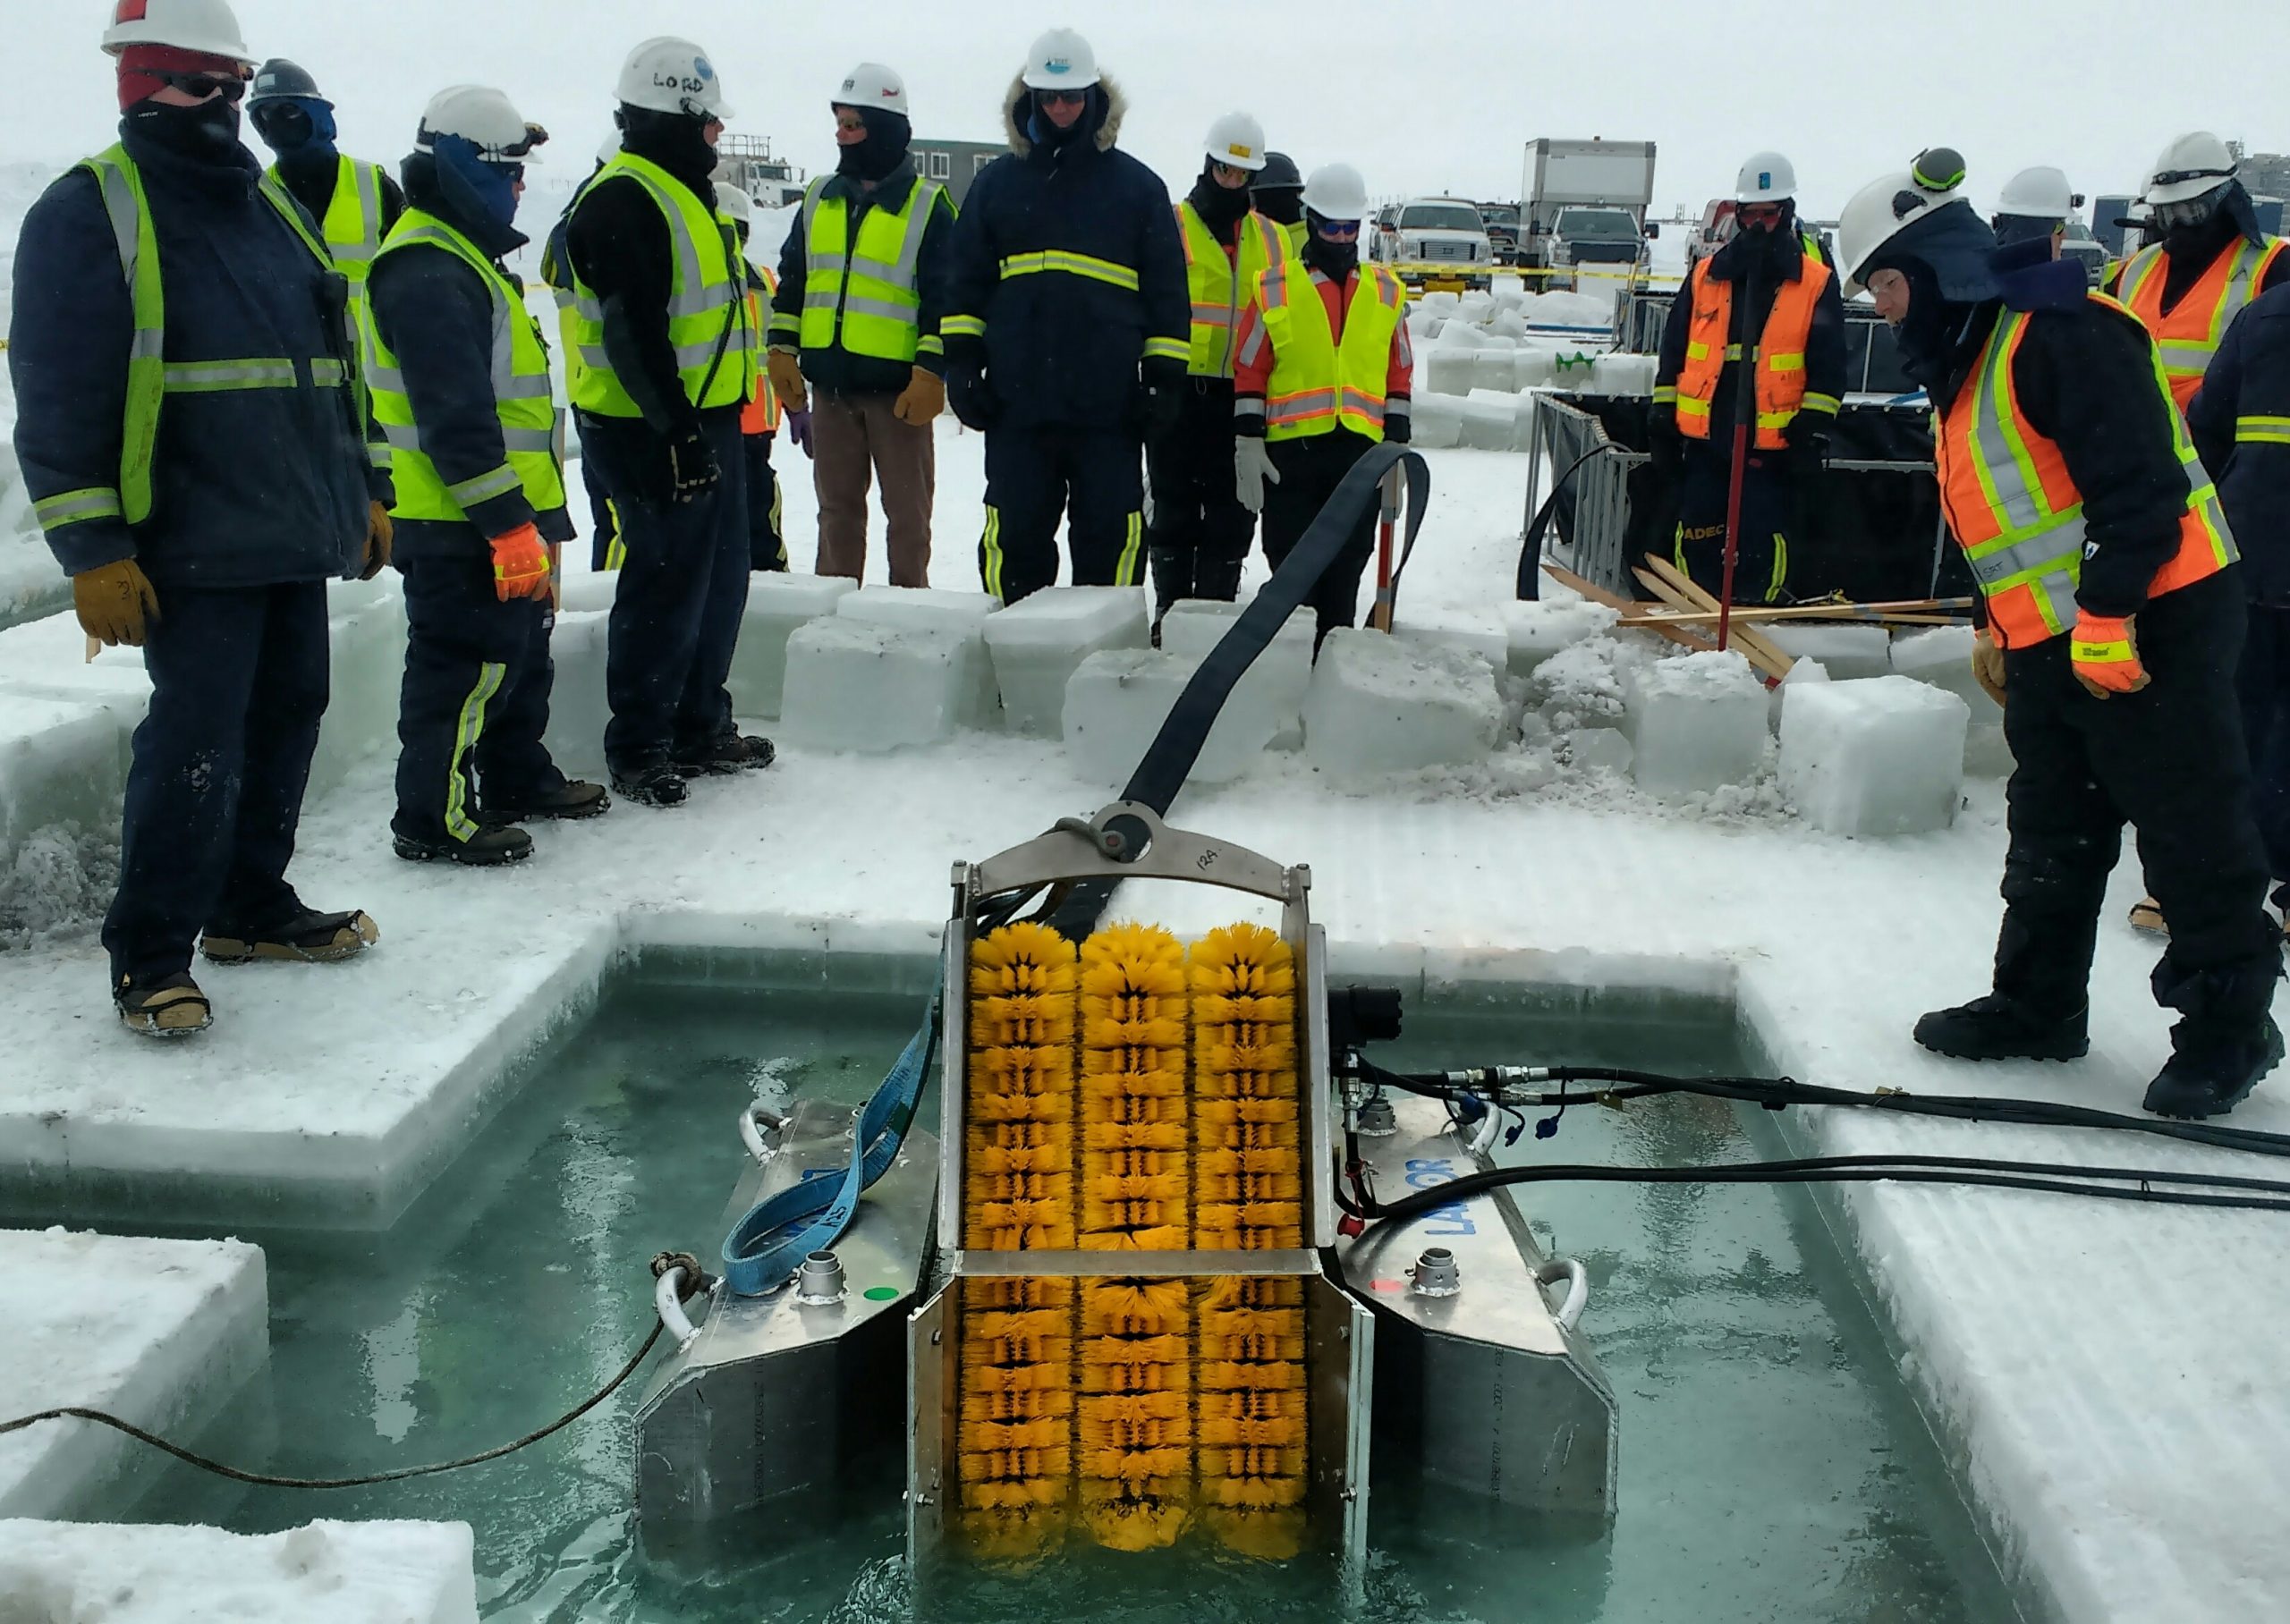 Demonstrating recovery of oil under ice (Tactic R-14) using a Lamor LAM-12 Brush Skimmer during BSEE Spill Response Team Equipment Deployment Exercise